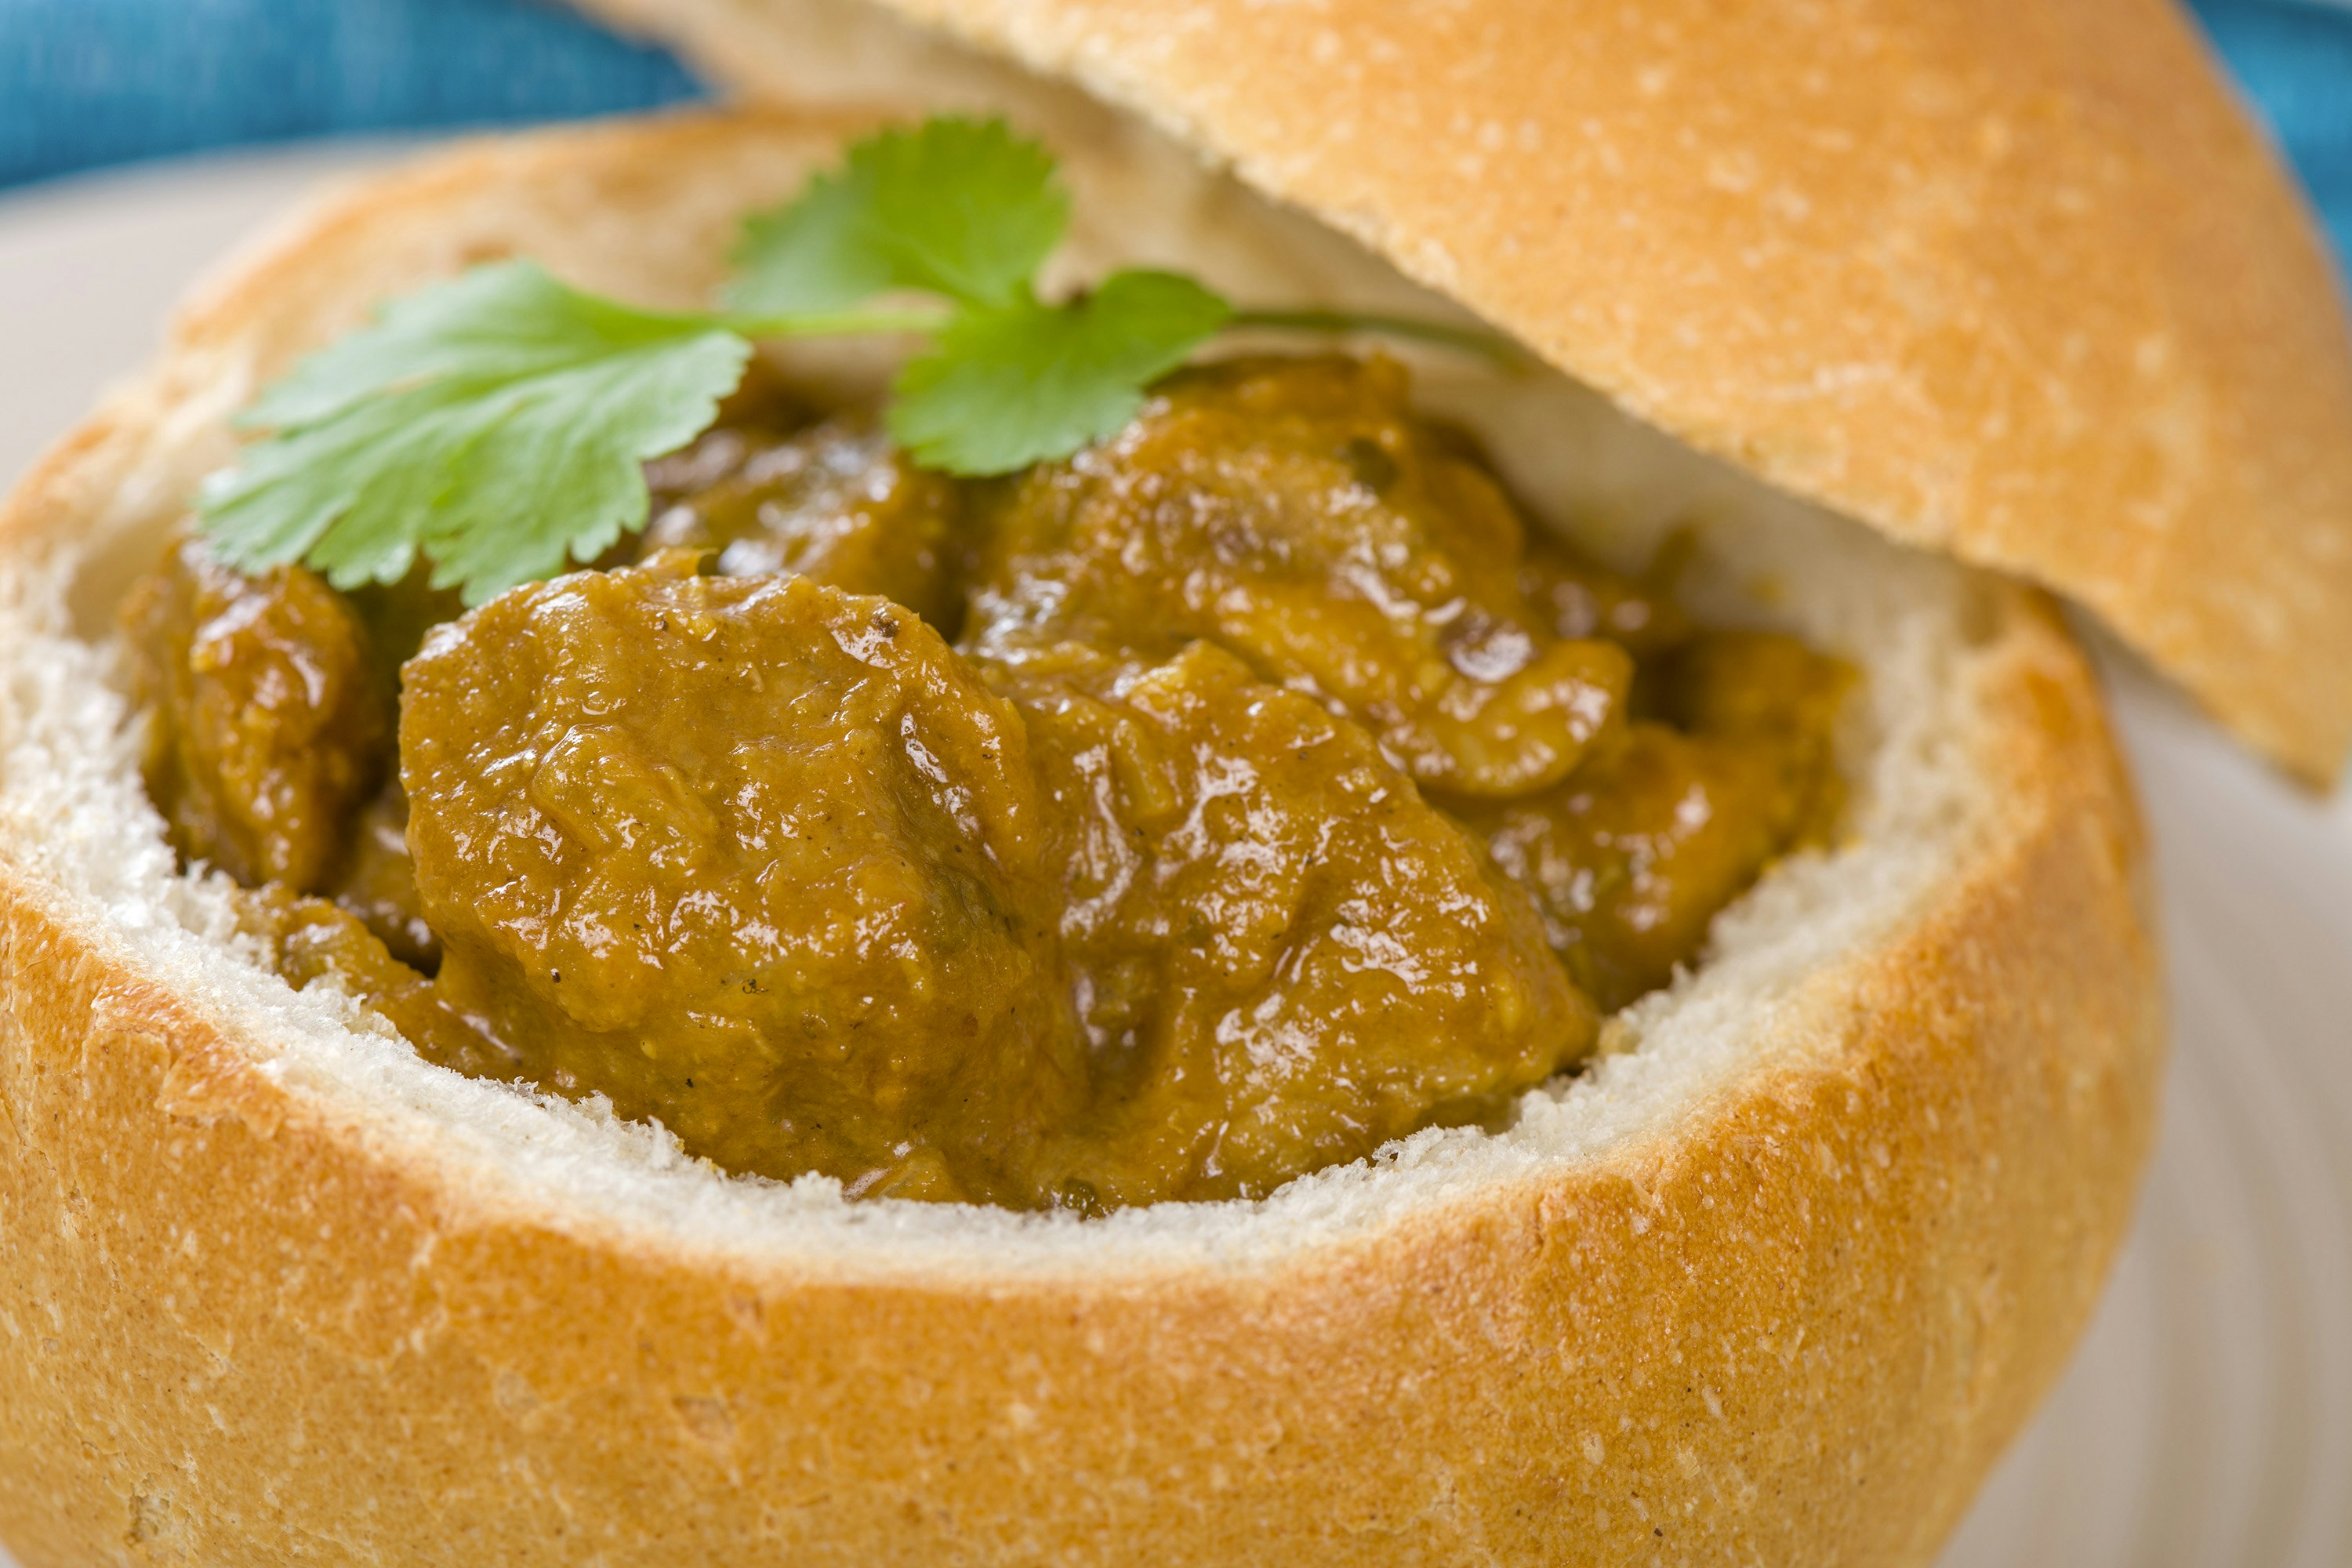 Features - Bunny Chow